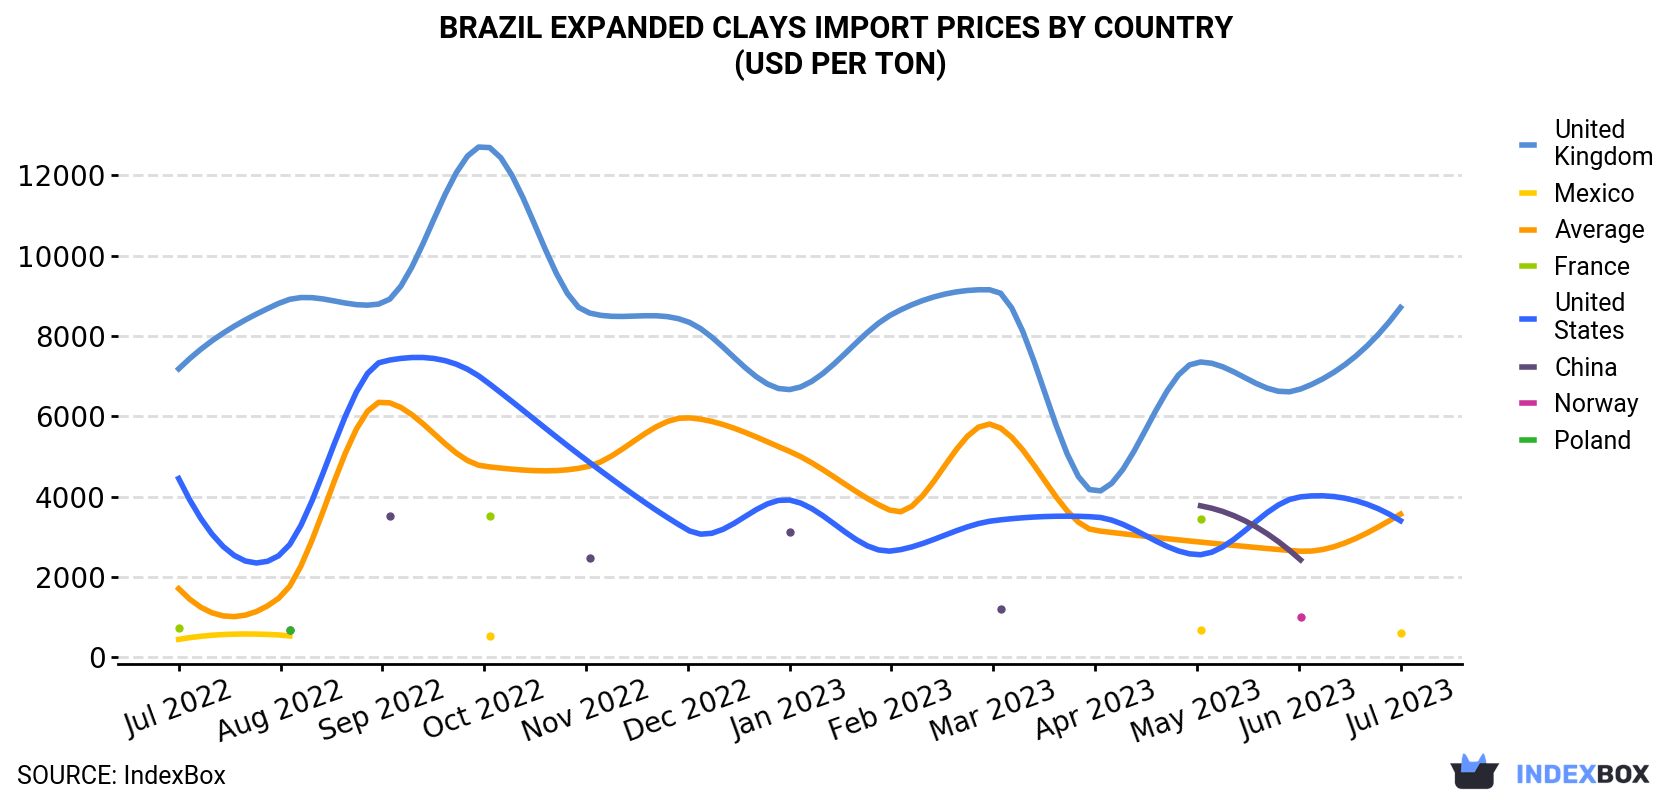 Brazil Expanded Clays Import Prices By Country (USD Per Ton)